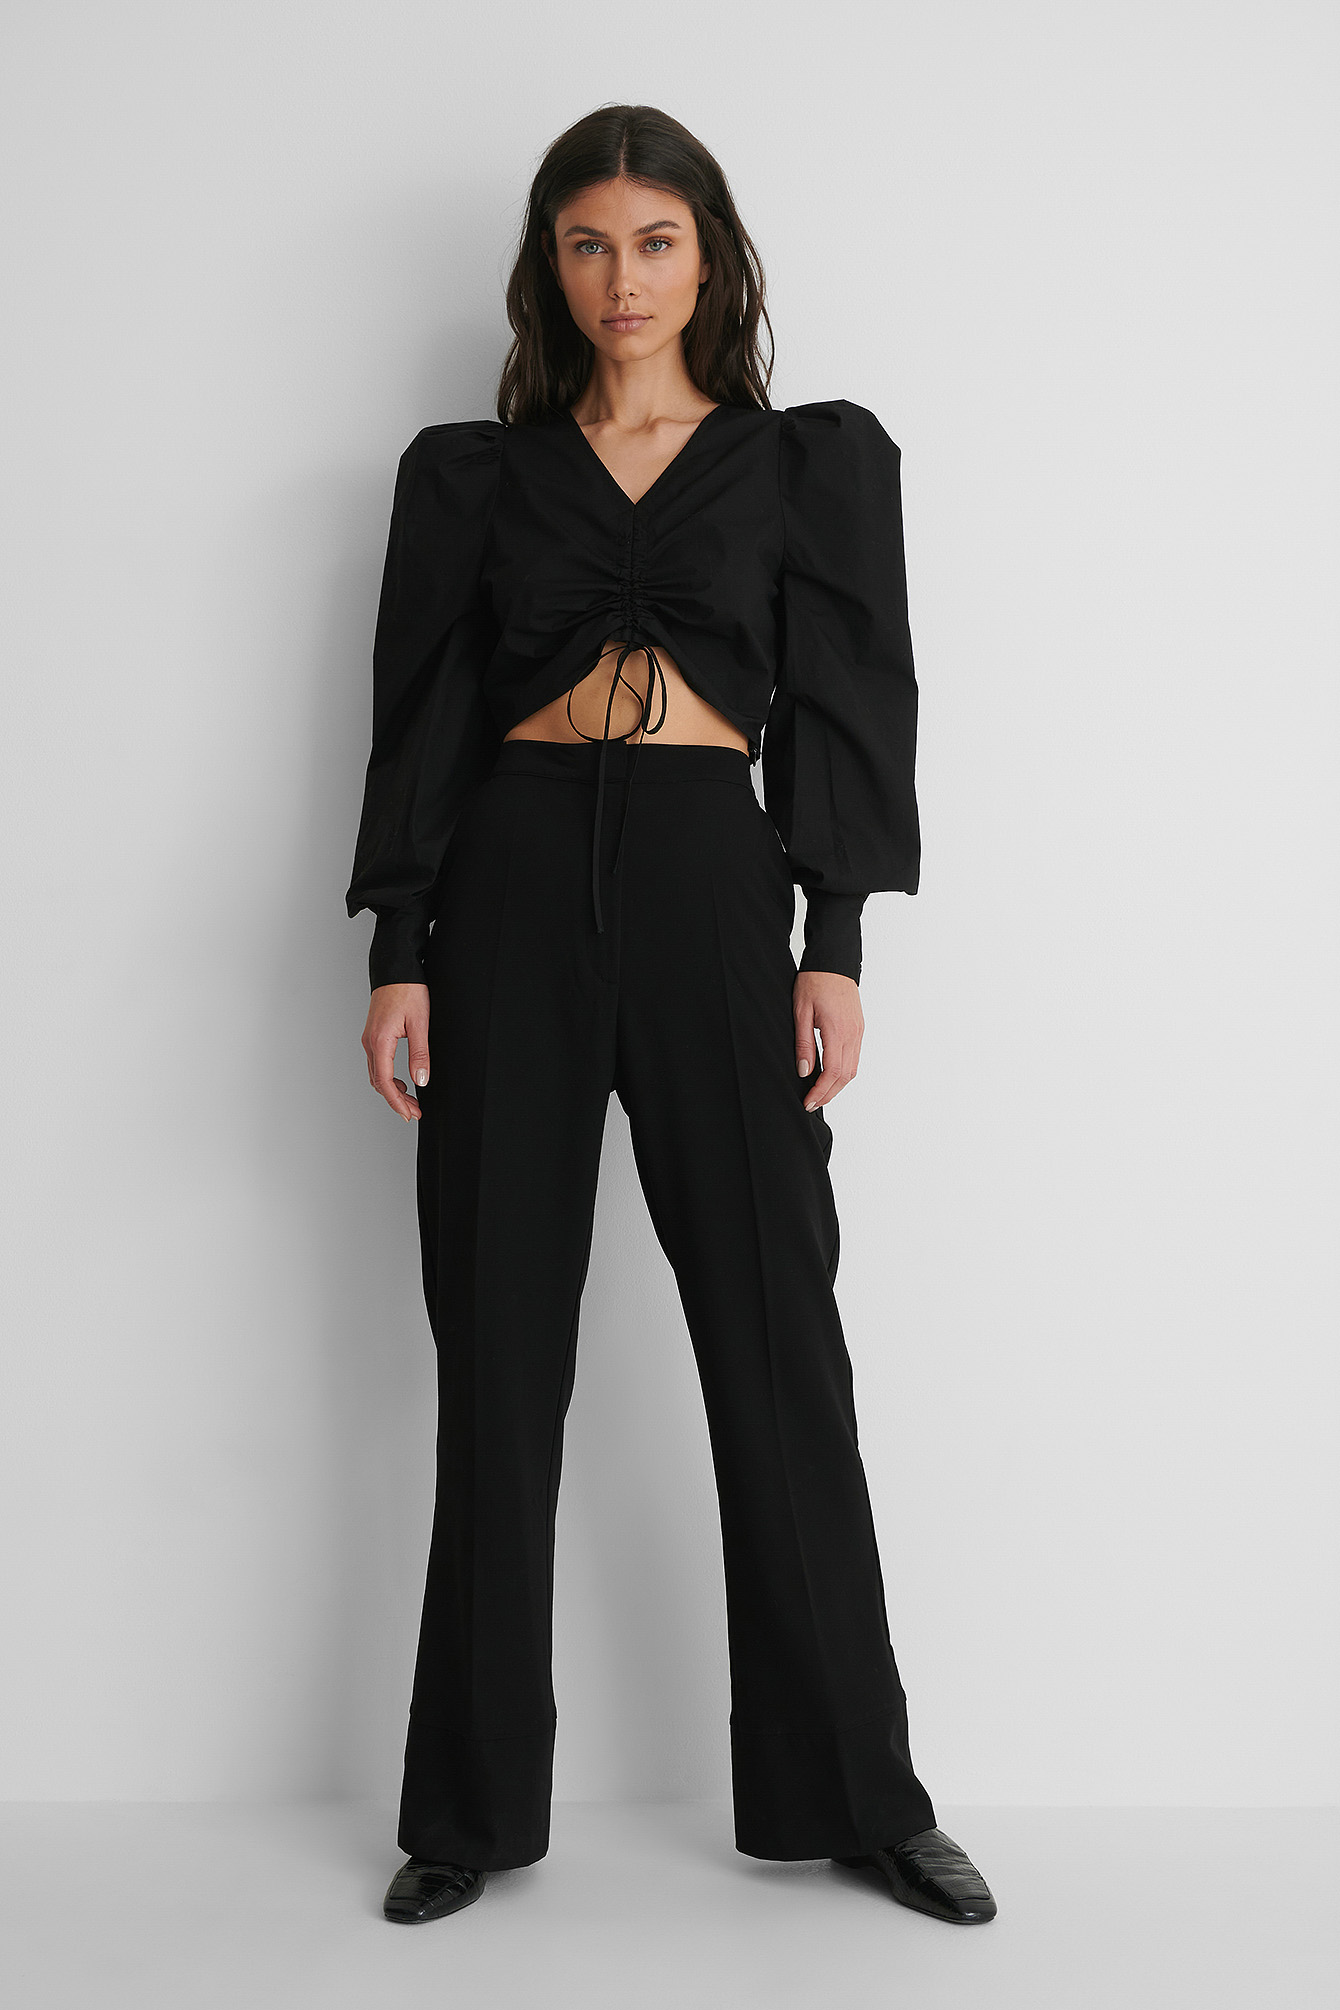 Cotton Drawstring Top with Suit Pants.